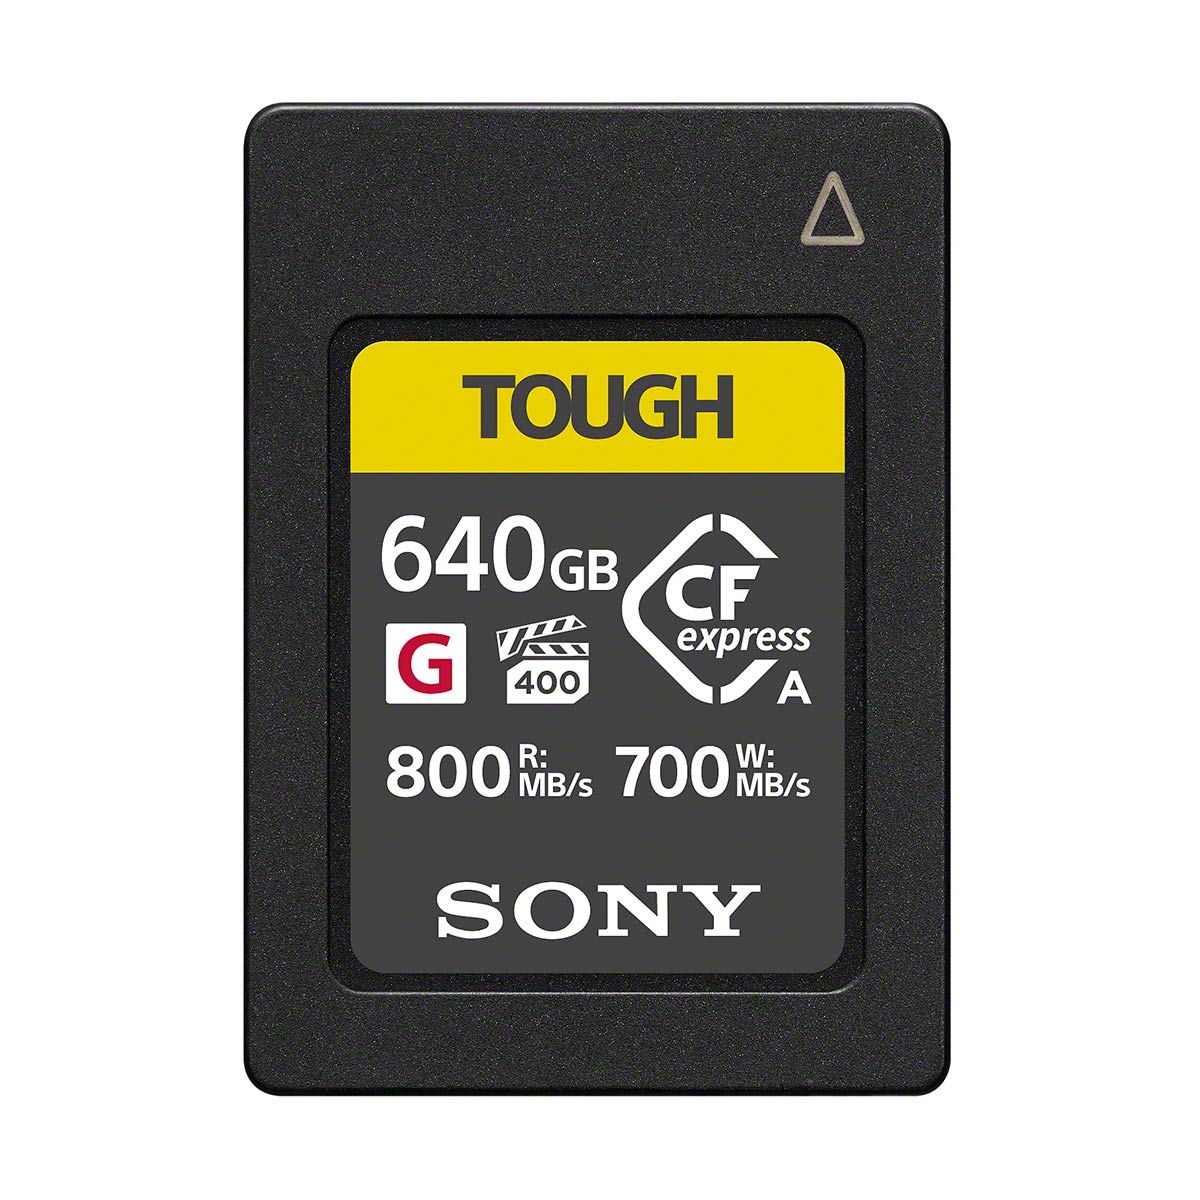 Sony 640GB CFexpress Type A Memory Card (VPG 400)